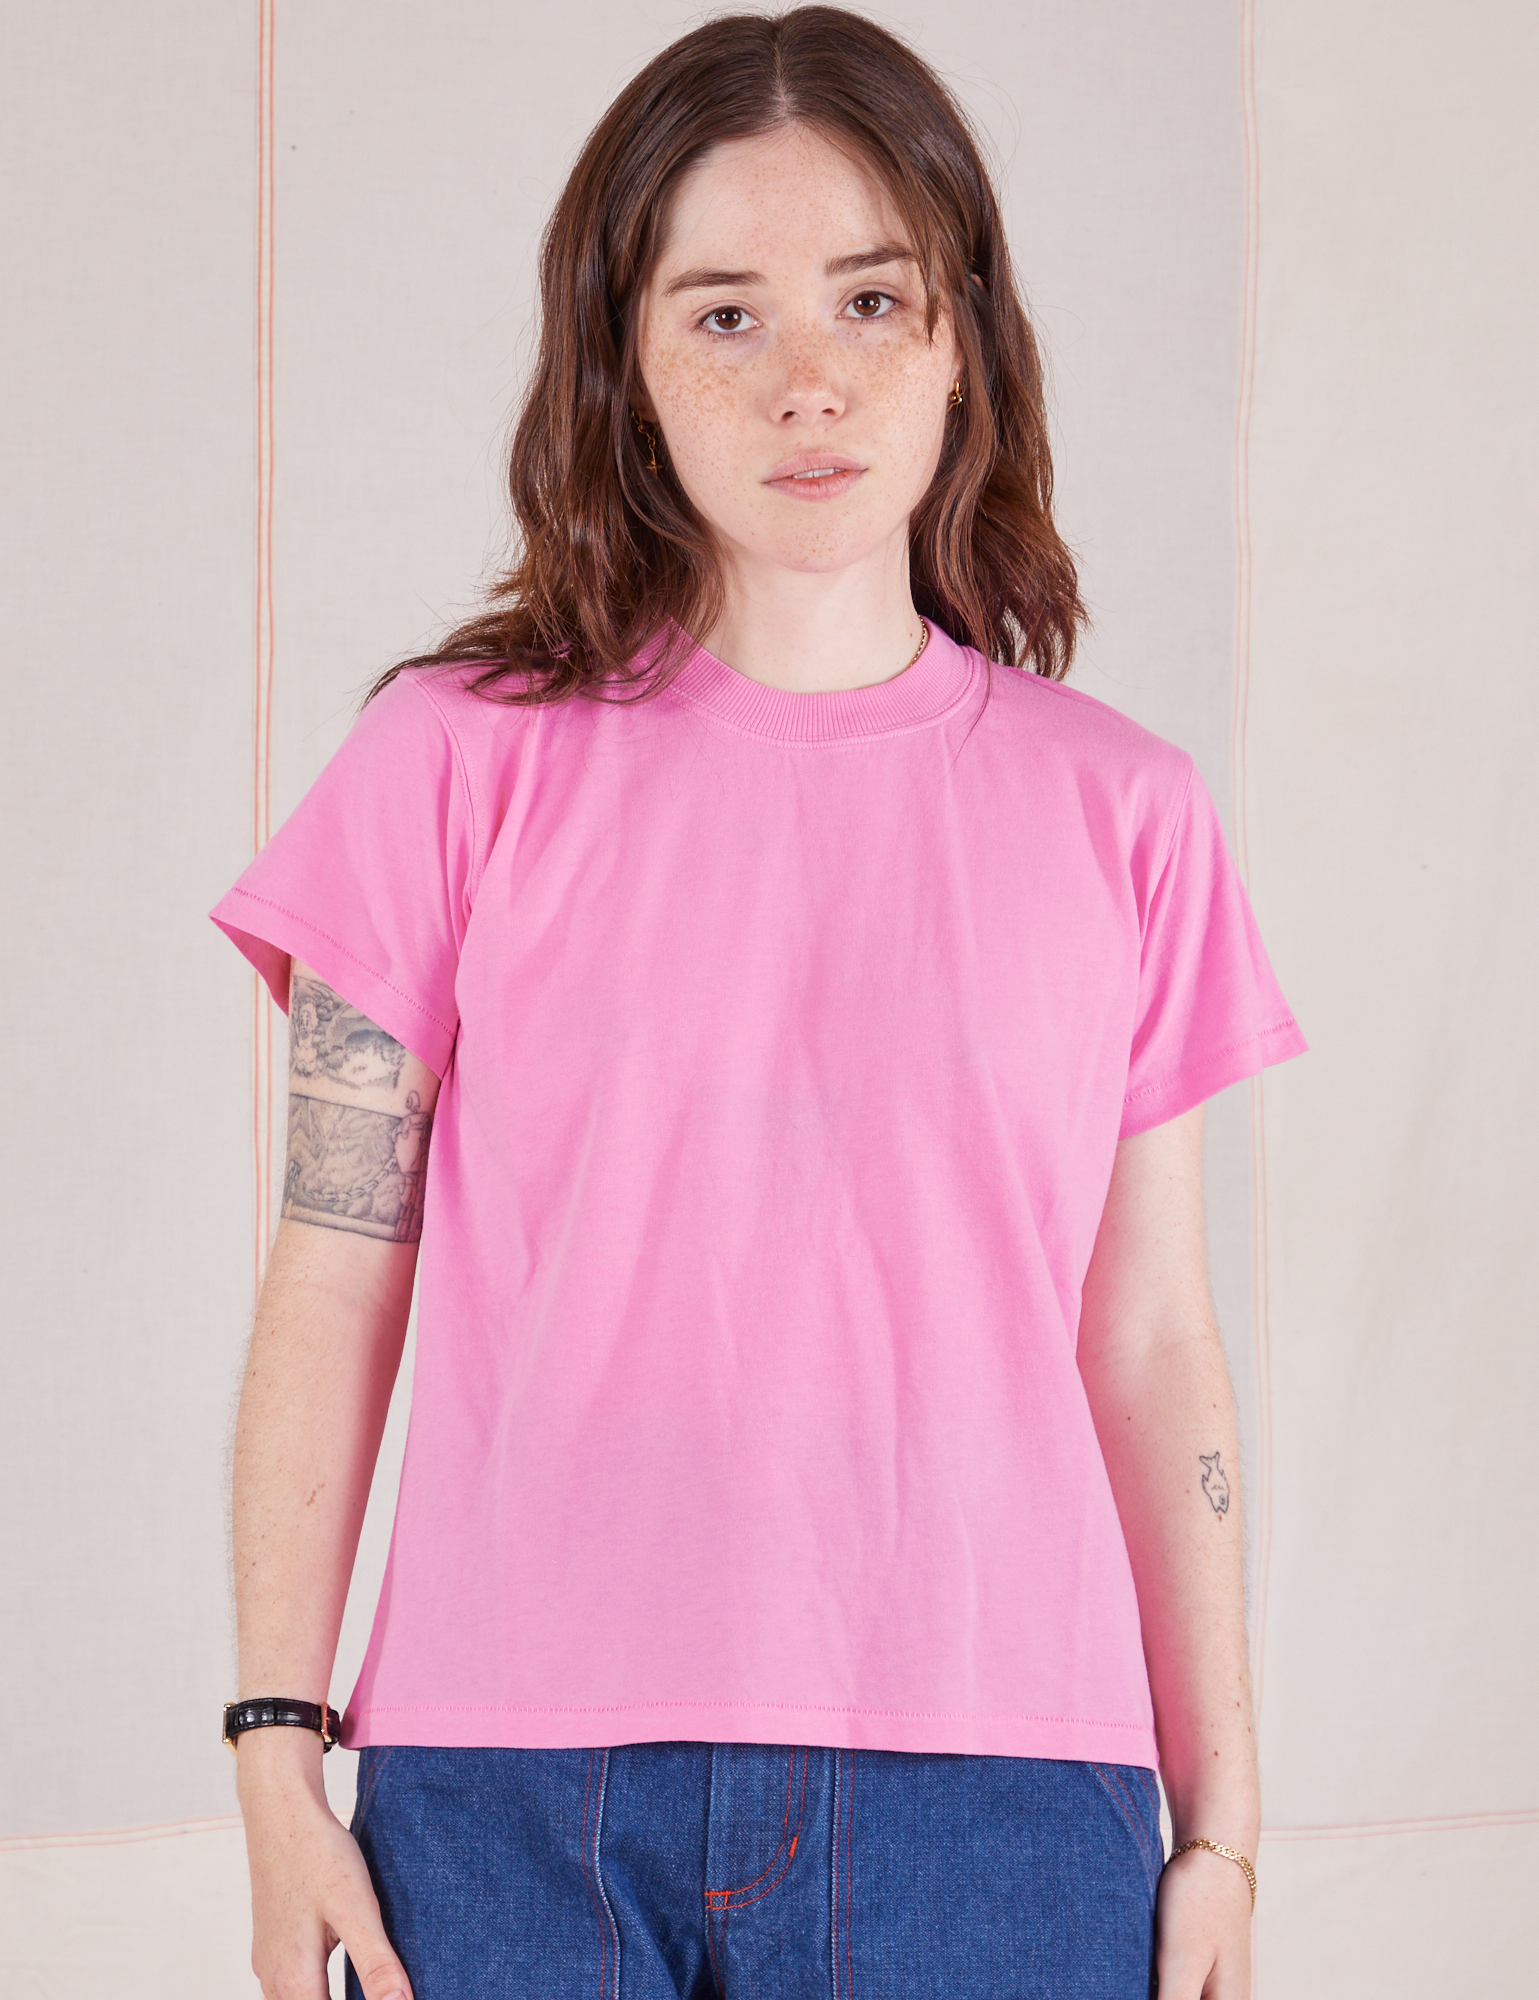 Hana is 5&#39;3&quot; and wearing P Organic Vintage Tee in Bubblegum Pink